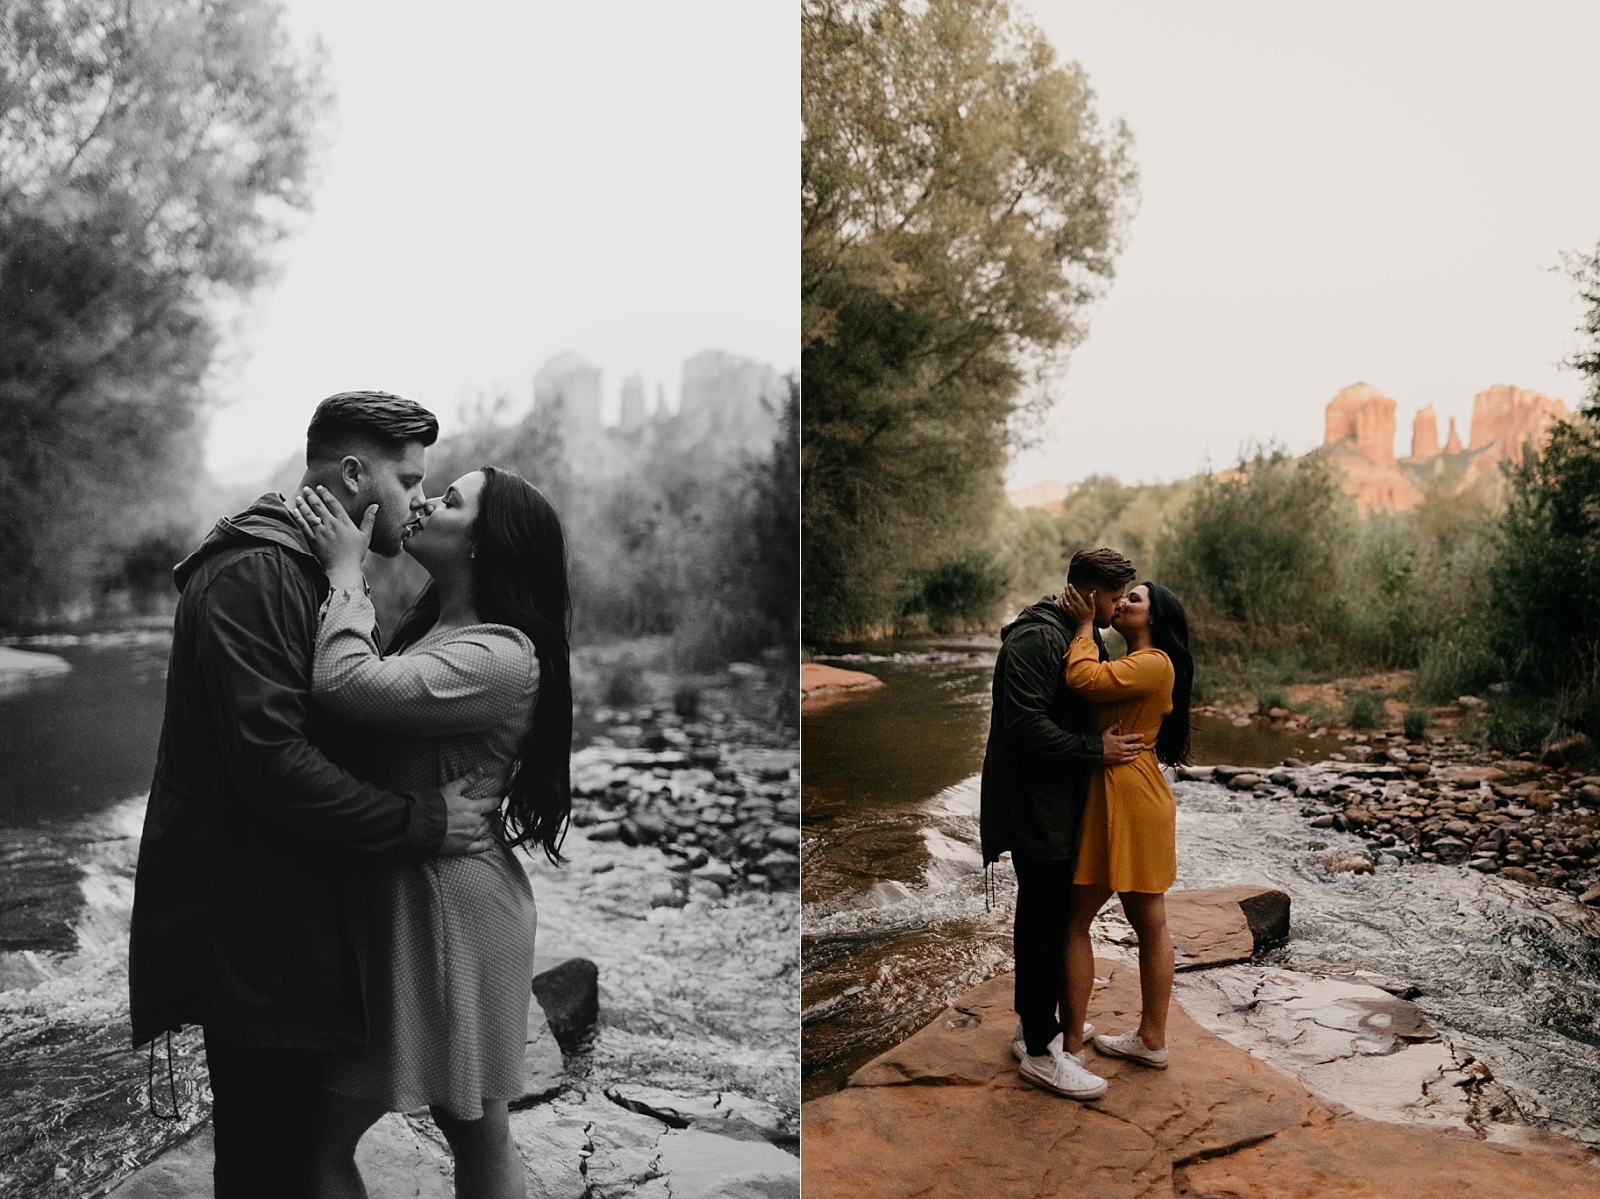 Red rock crossing park in the river engagement photos pictures Sedona AZ Samantha Patri Photography